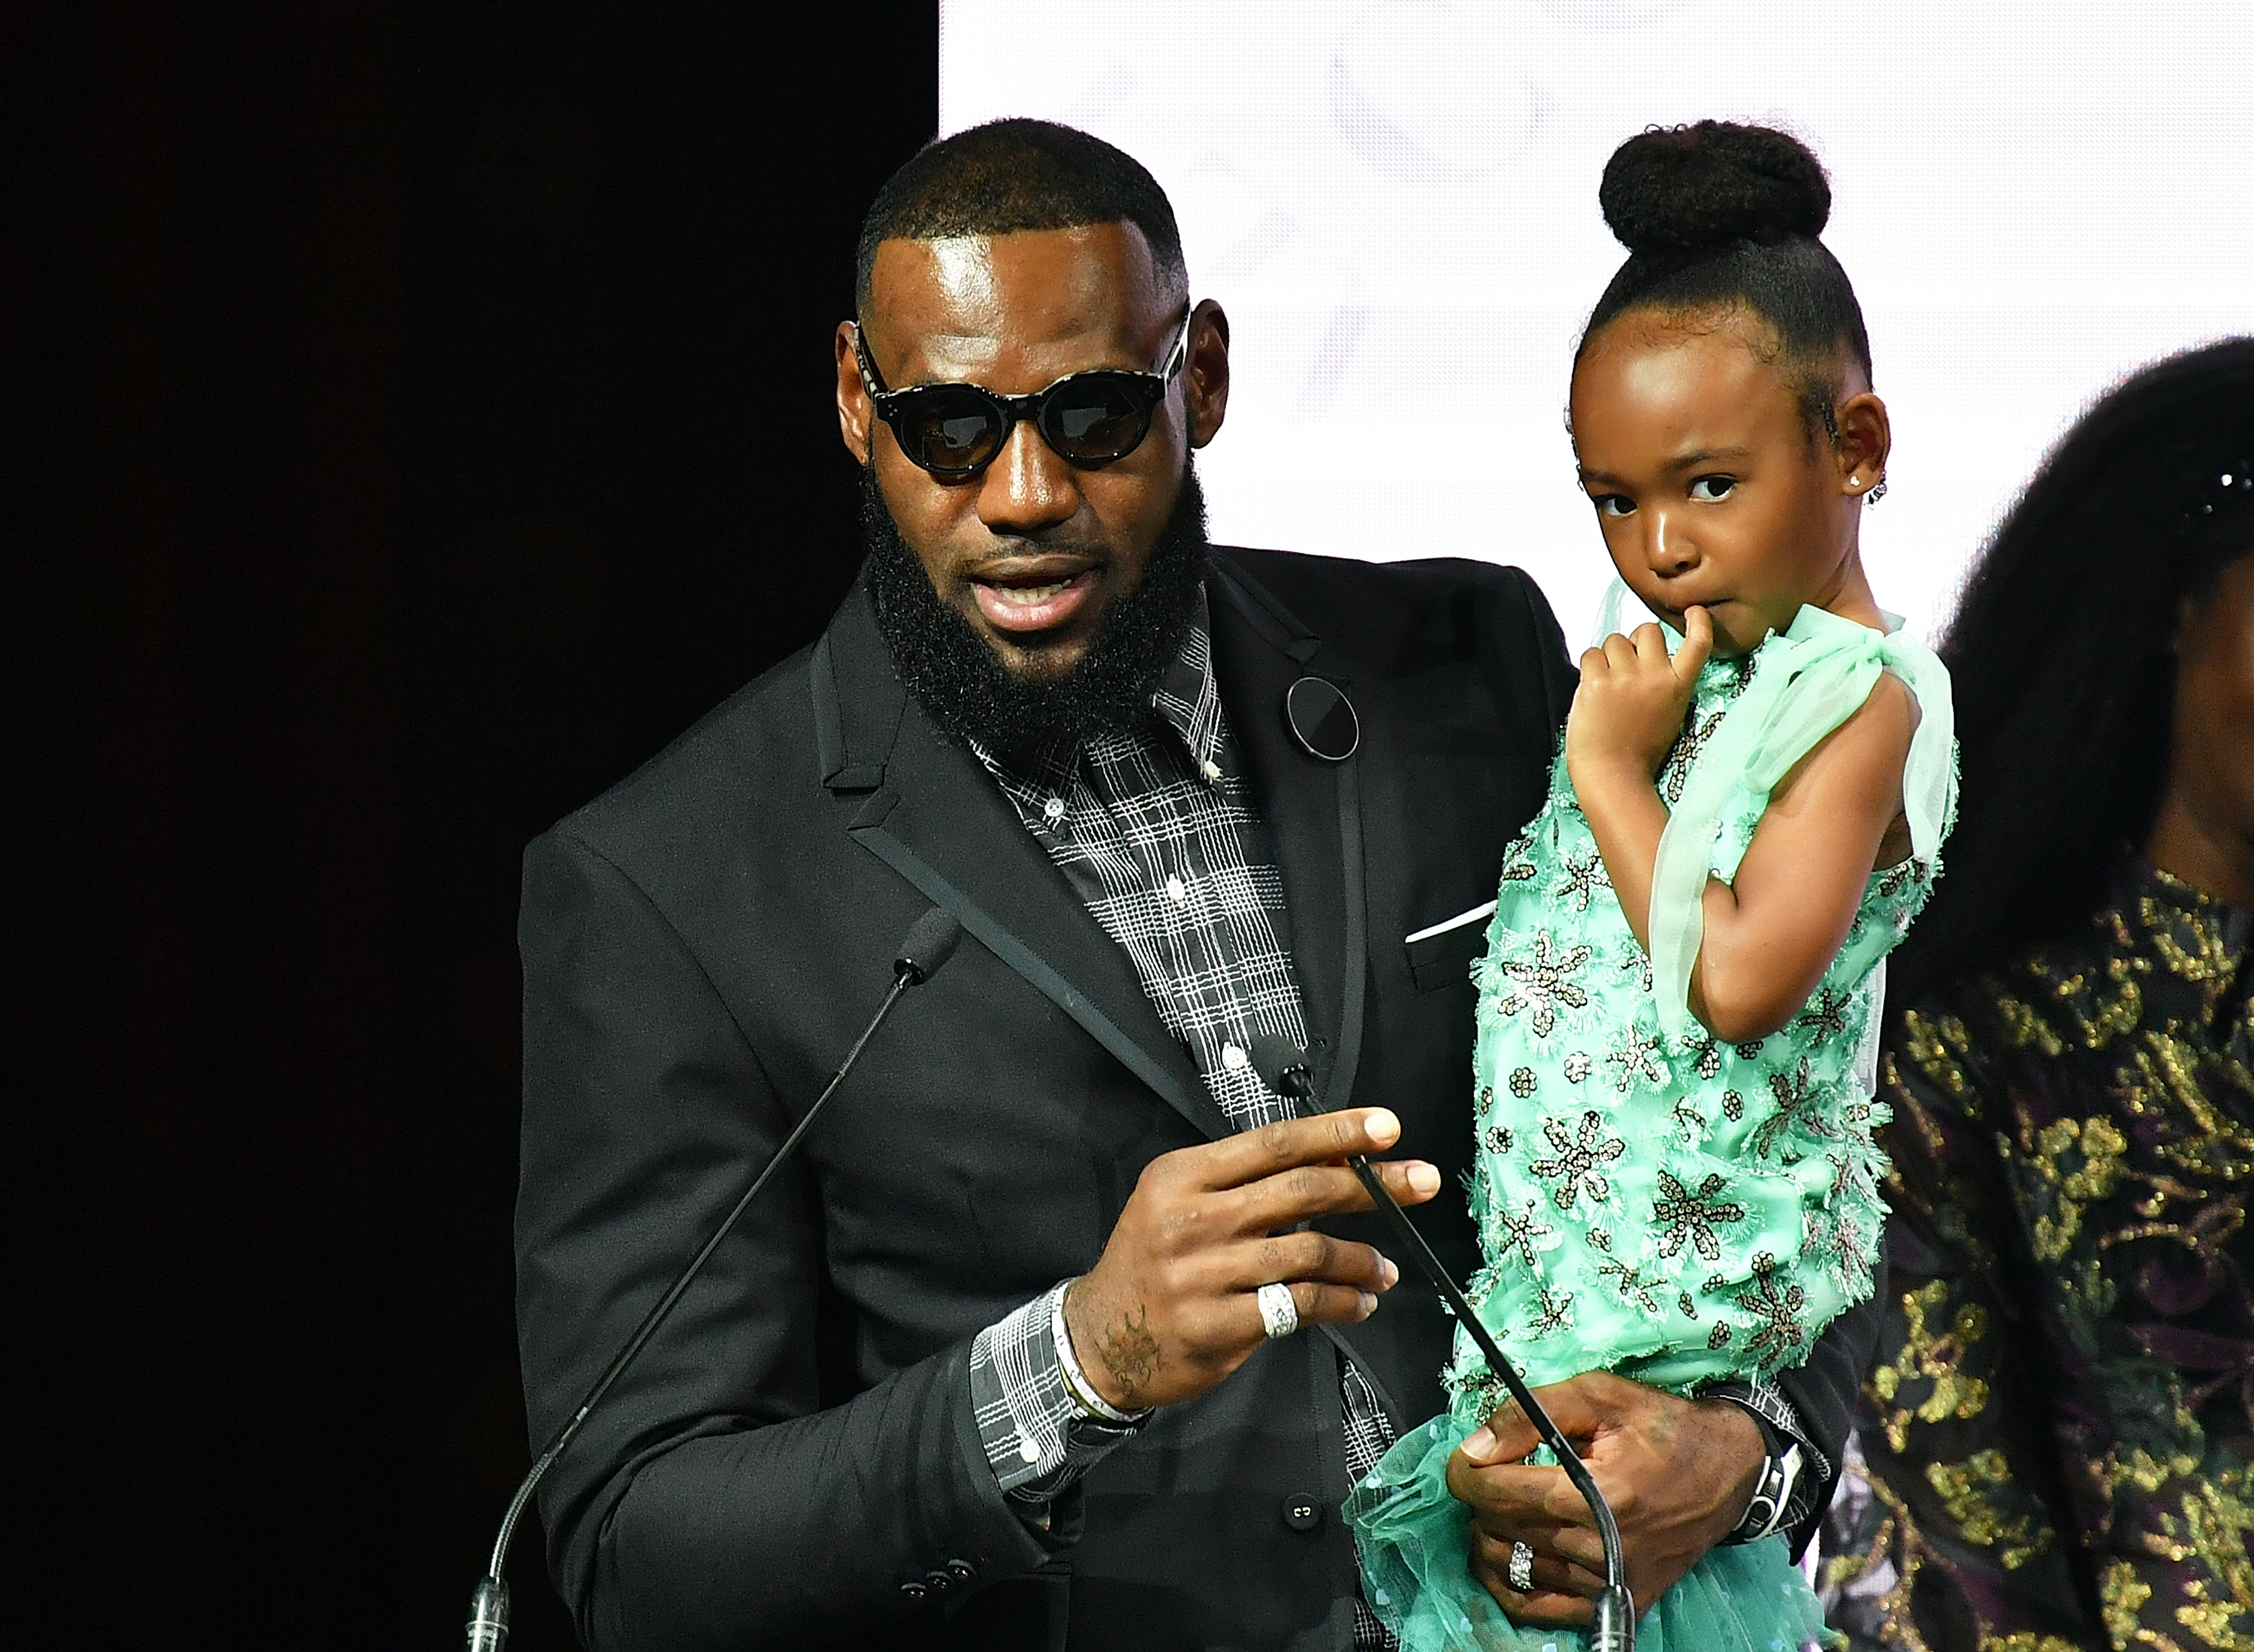 LeBron James, recepient of Icon 360 Award and daughter Zhuri James attend Harlem's Fashion Row during New York Fahion Week at Capitale on September 4, 2018, in New York City | Source: Getty Images